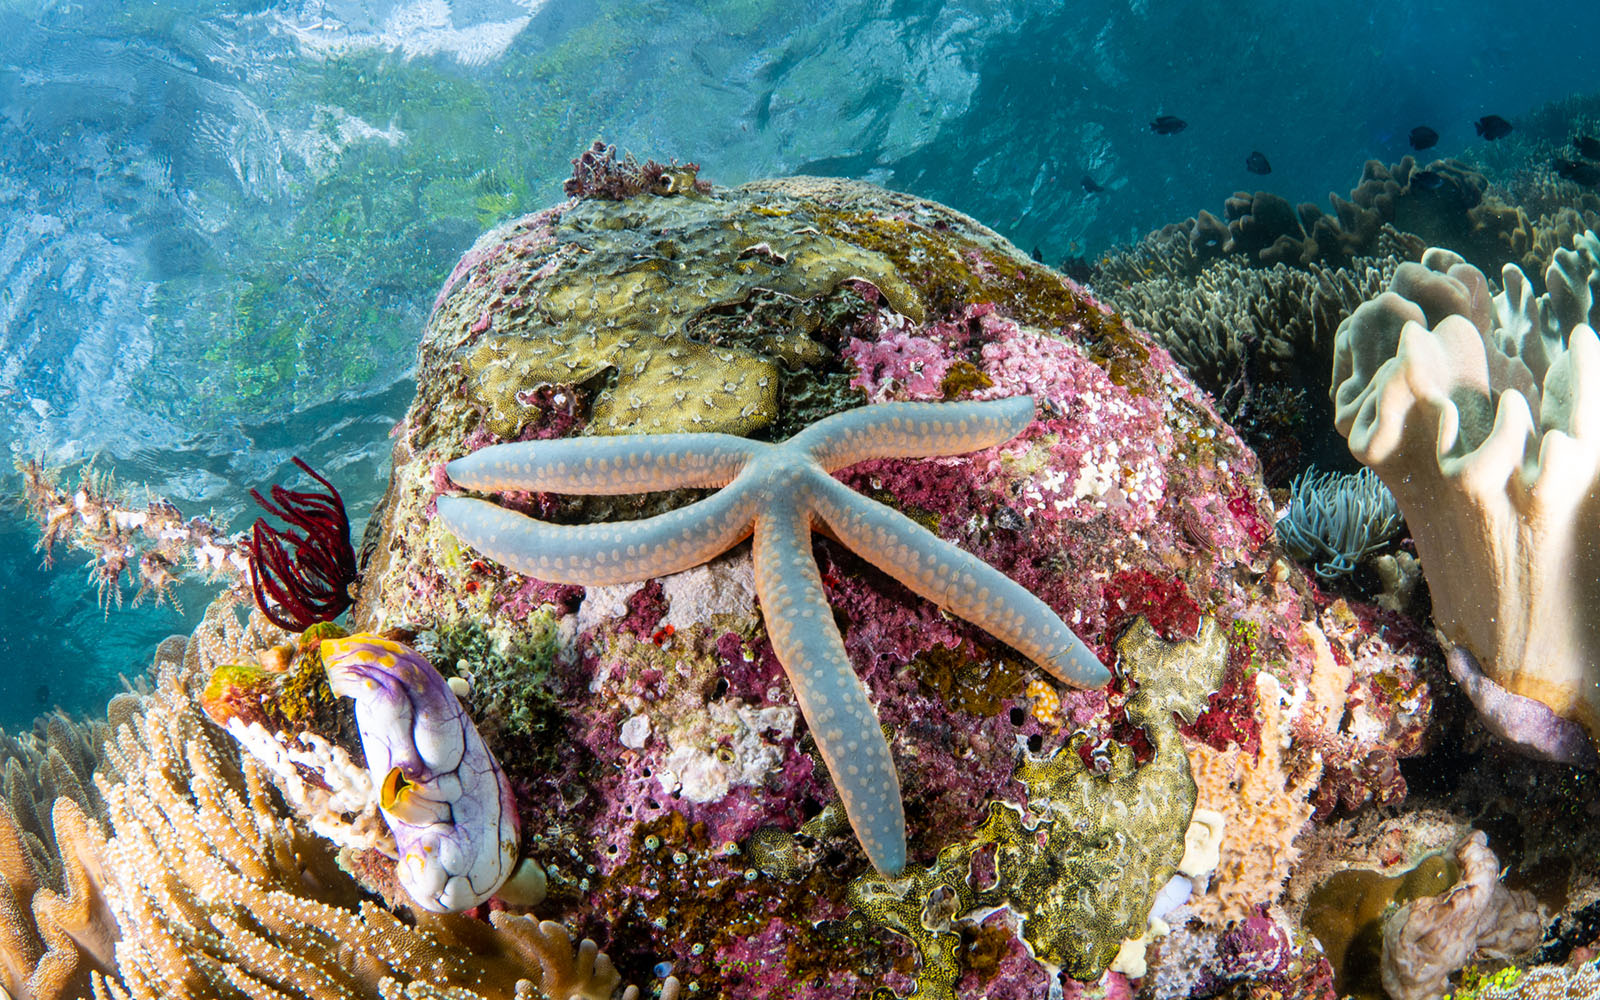 Blue seastar photographed by Snorkel Vacations on a snorkeling trip to Raja Ampat